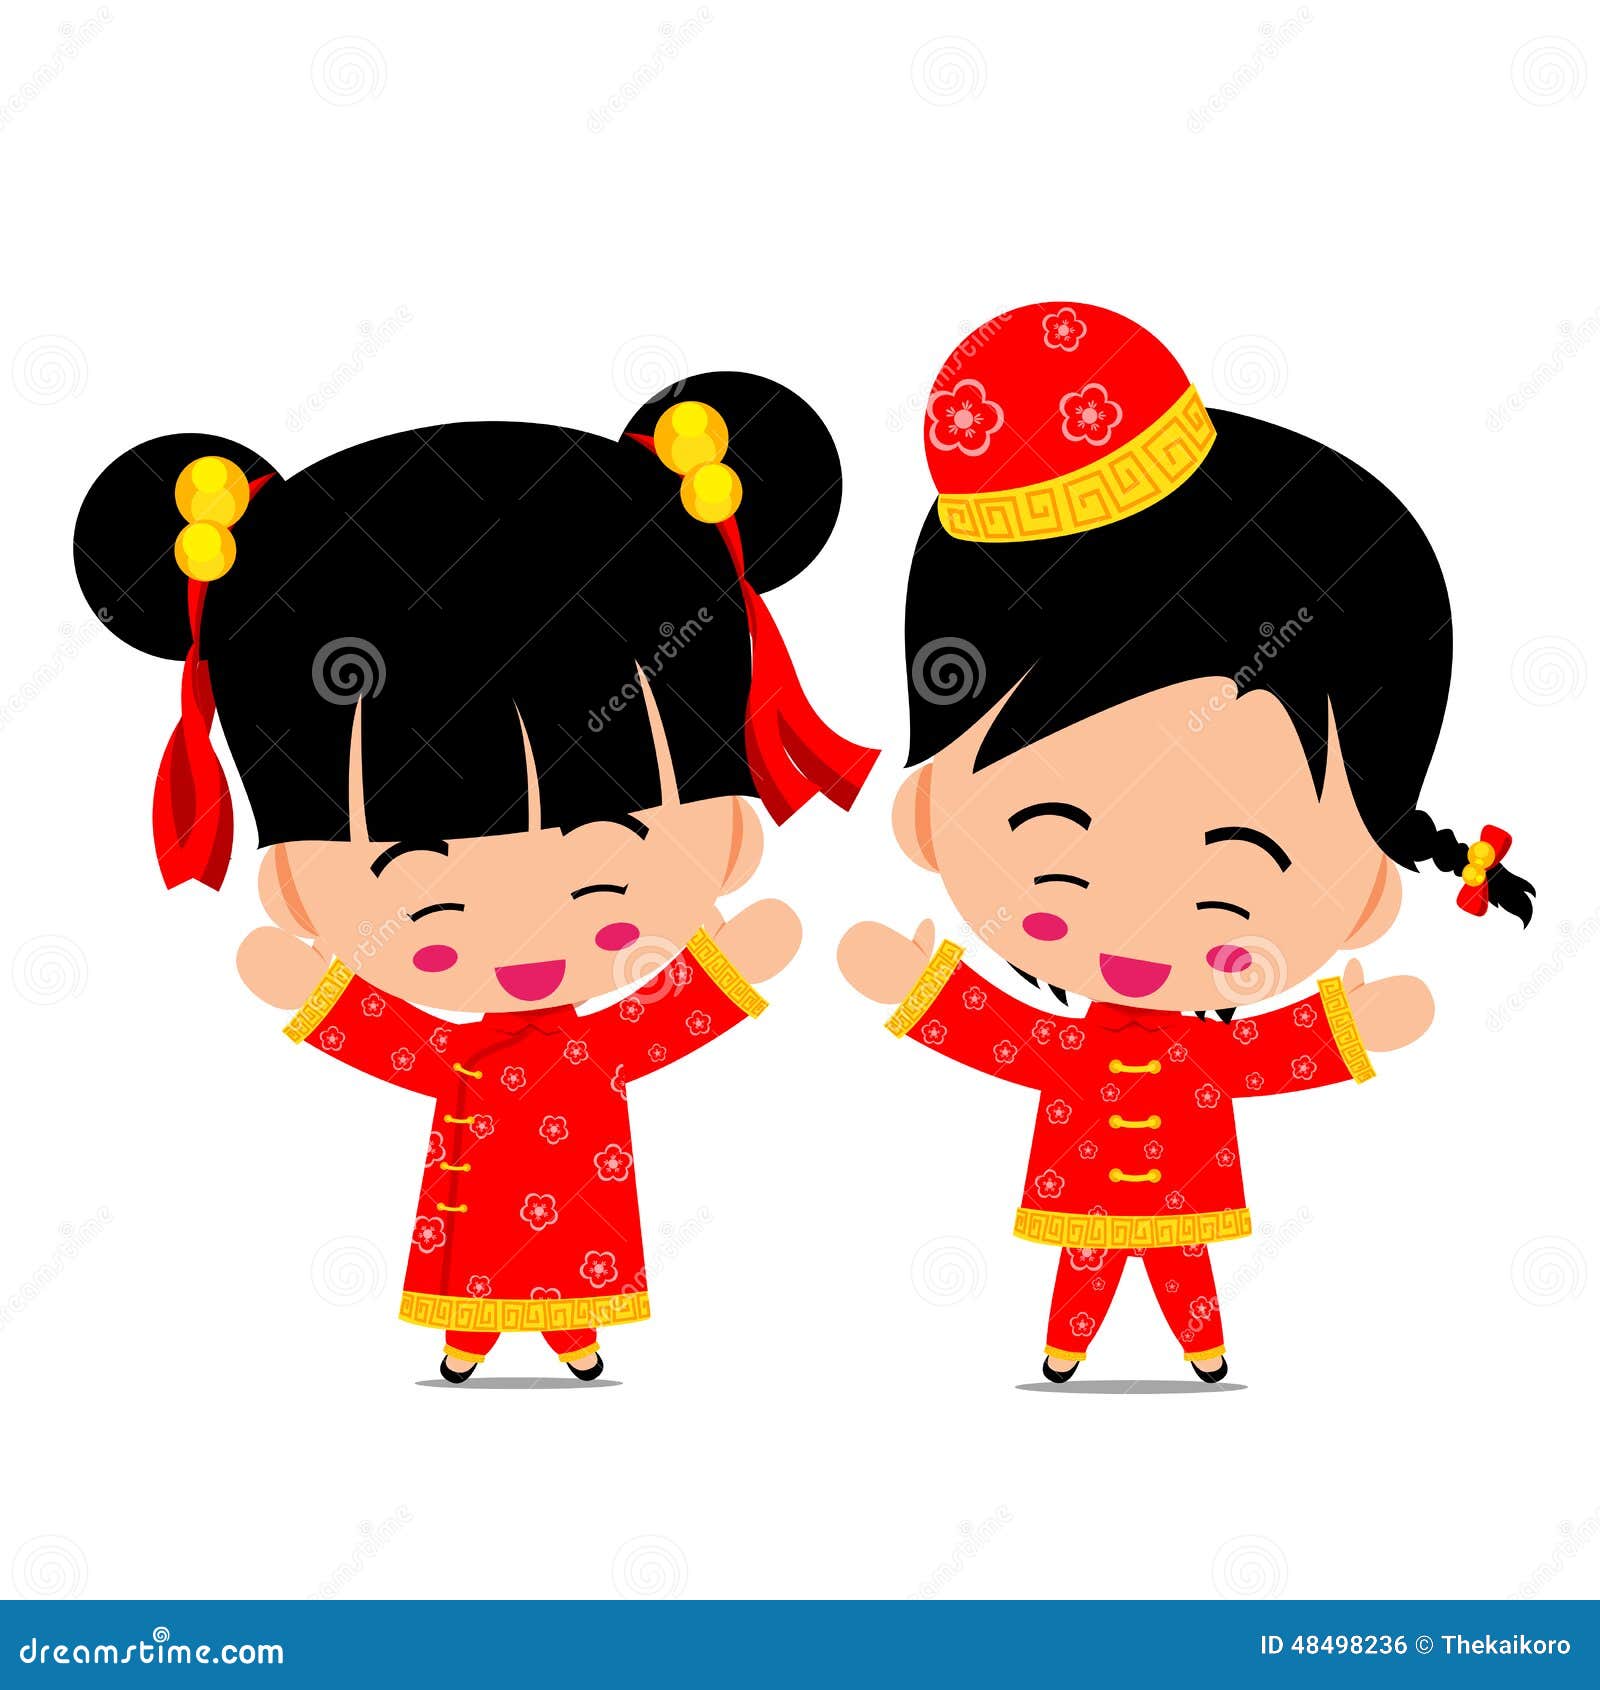 clipart chinese girl - photo #27